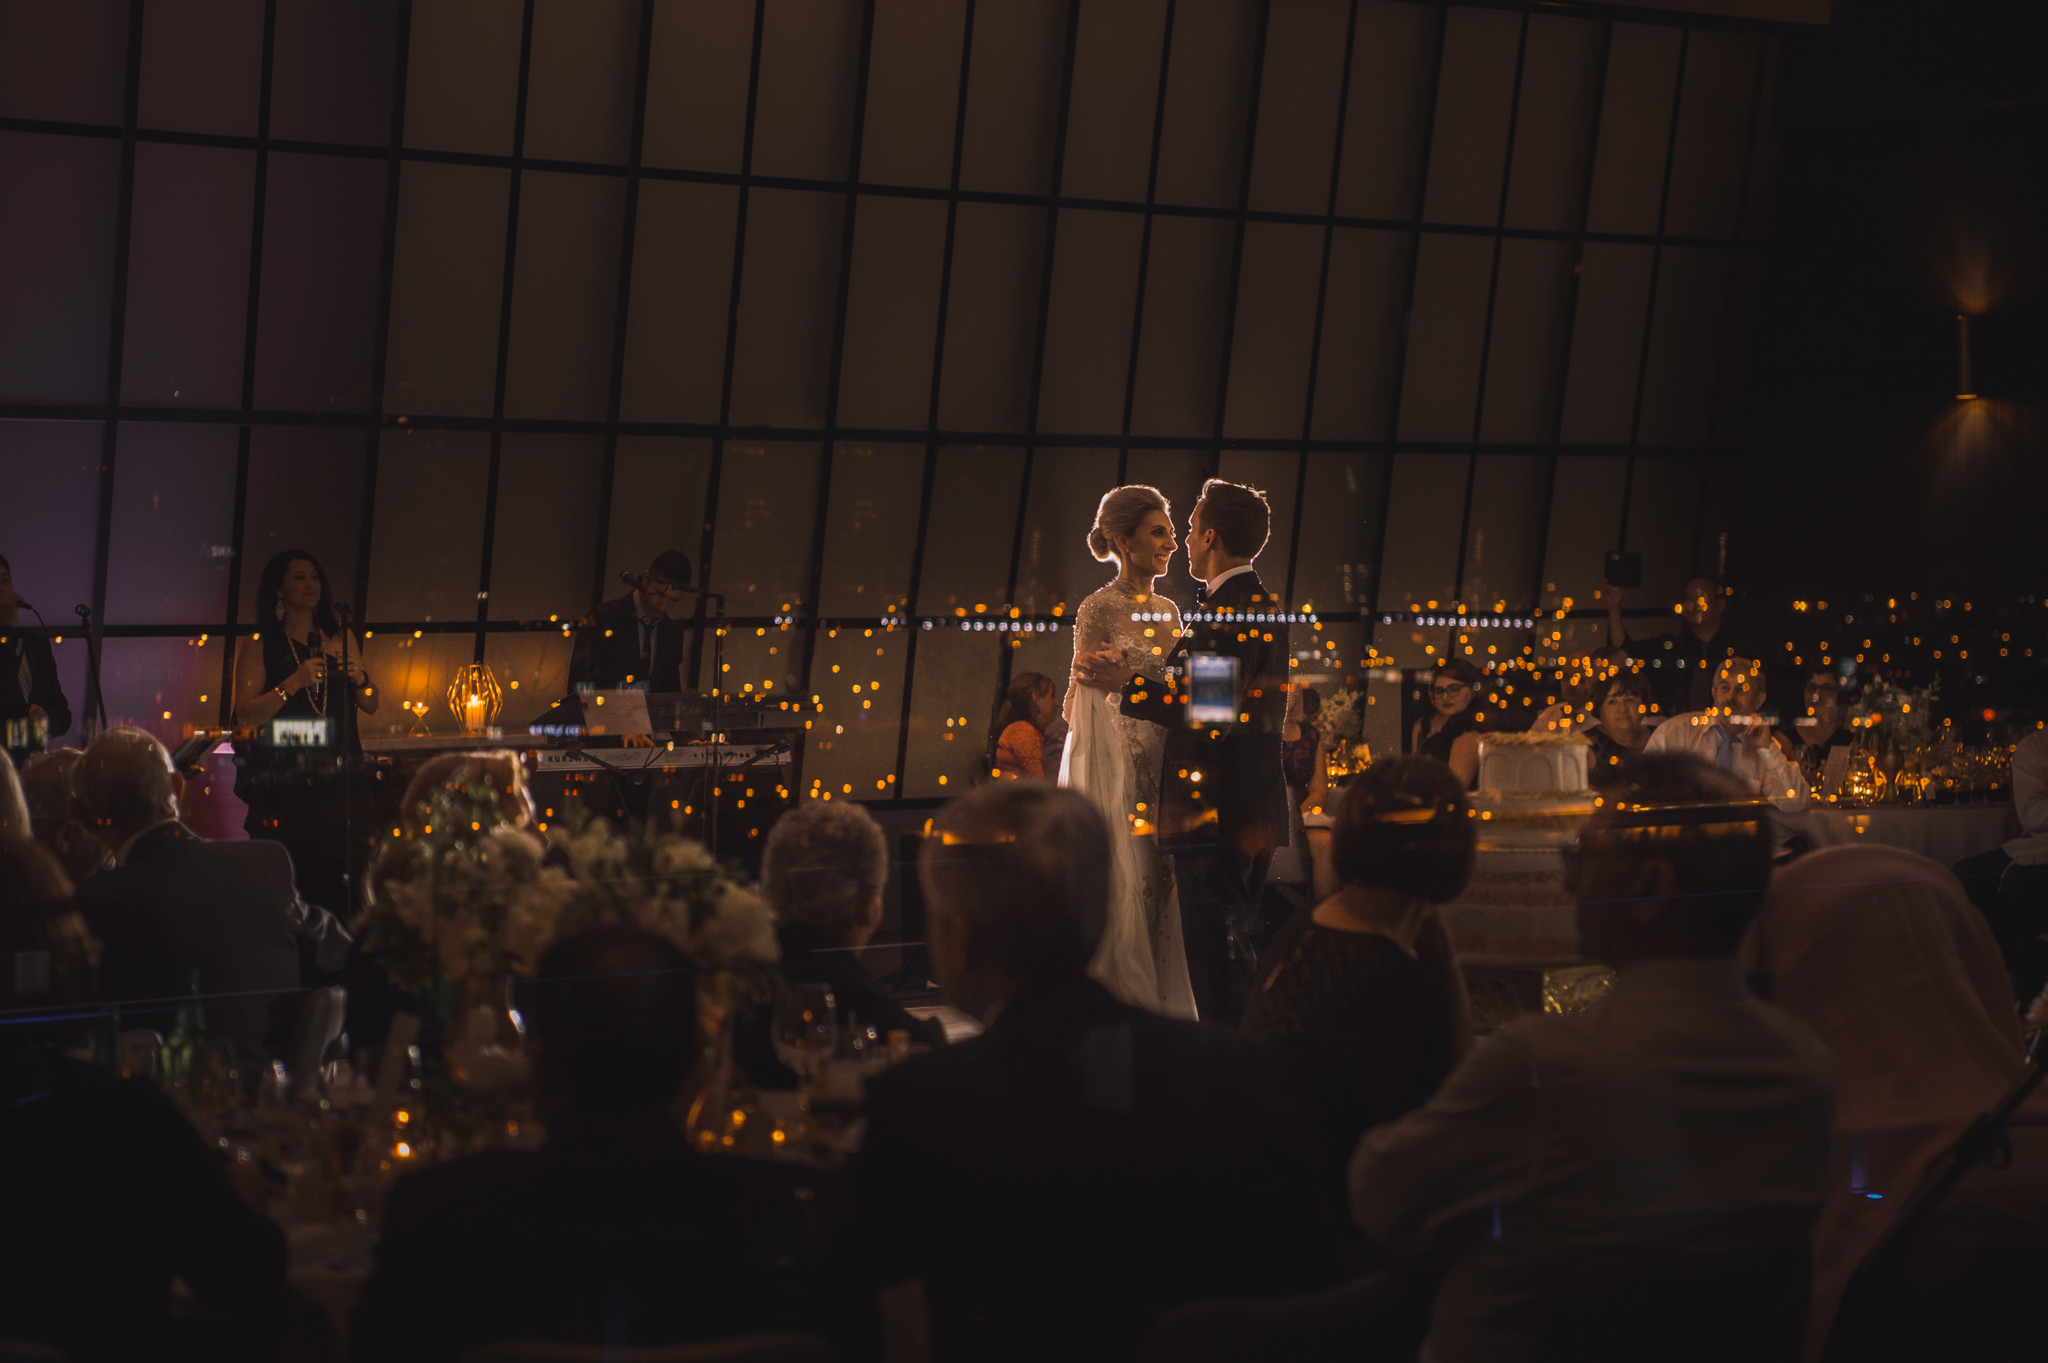 Candid photo of Wedding couples first dance seen through windows of Luminare reception with refection of the Melbourne city scape with guests